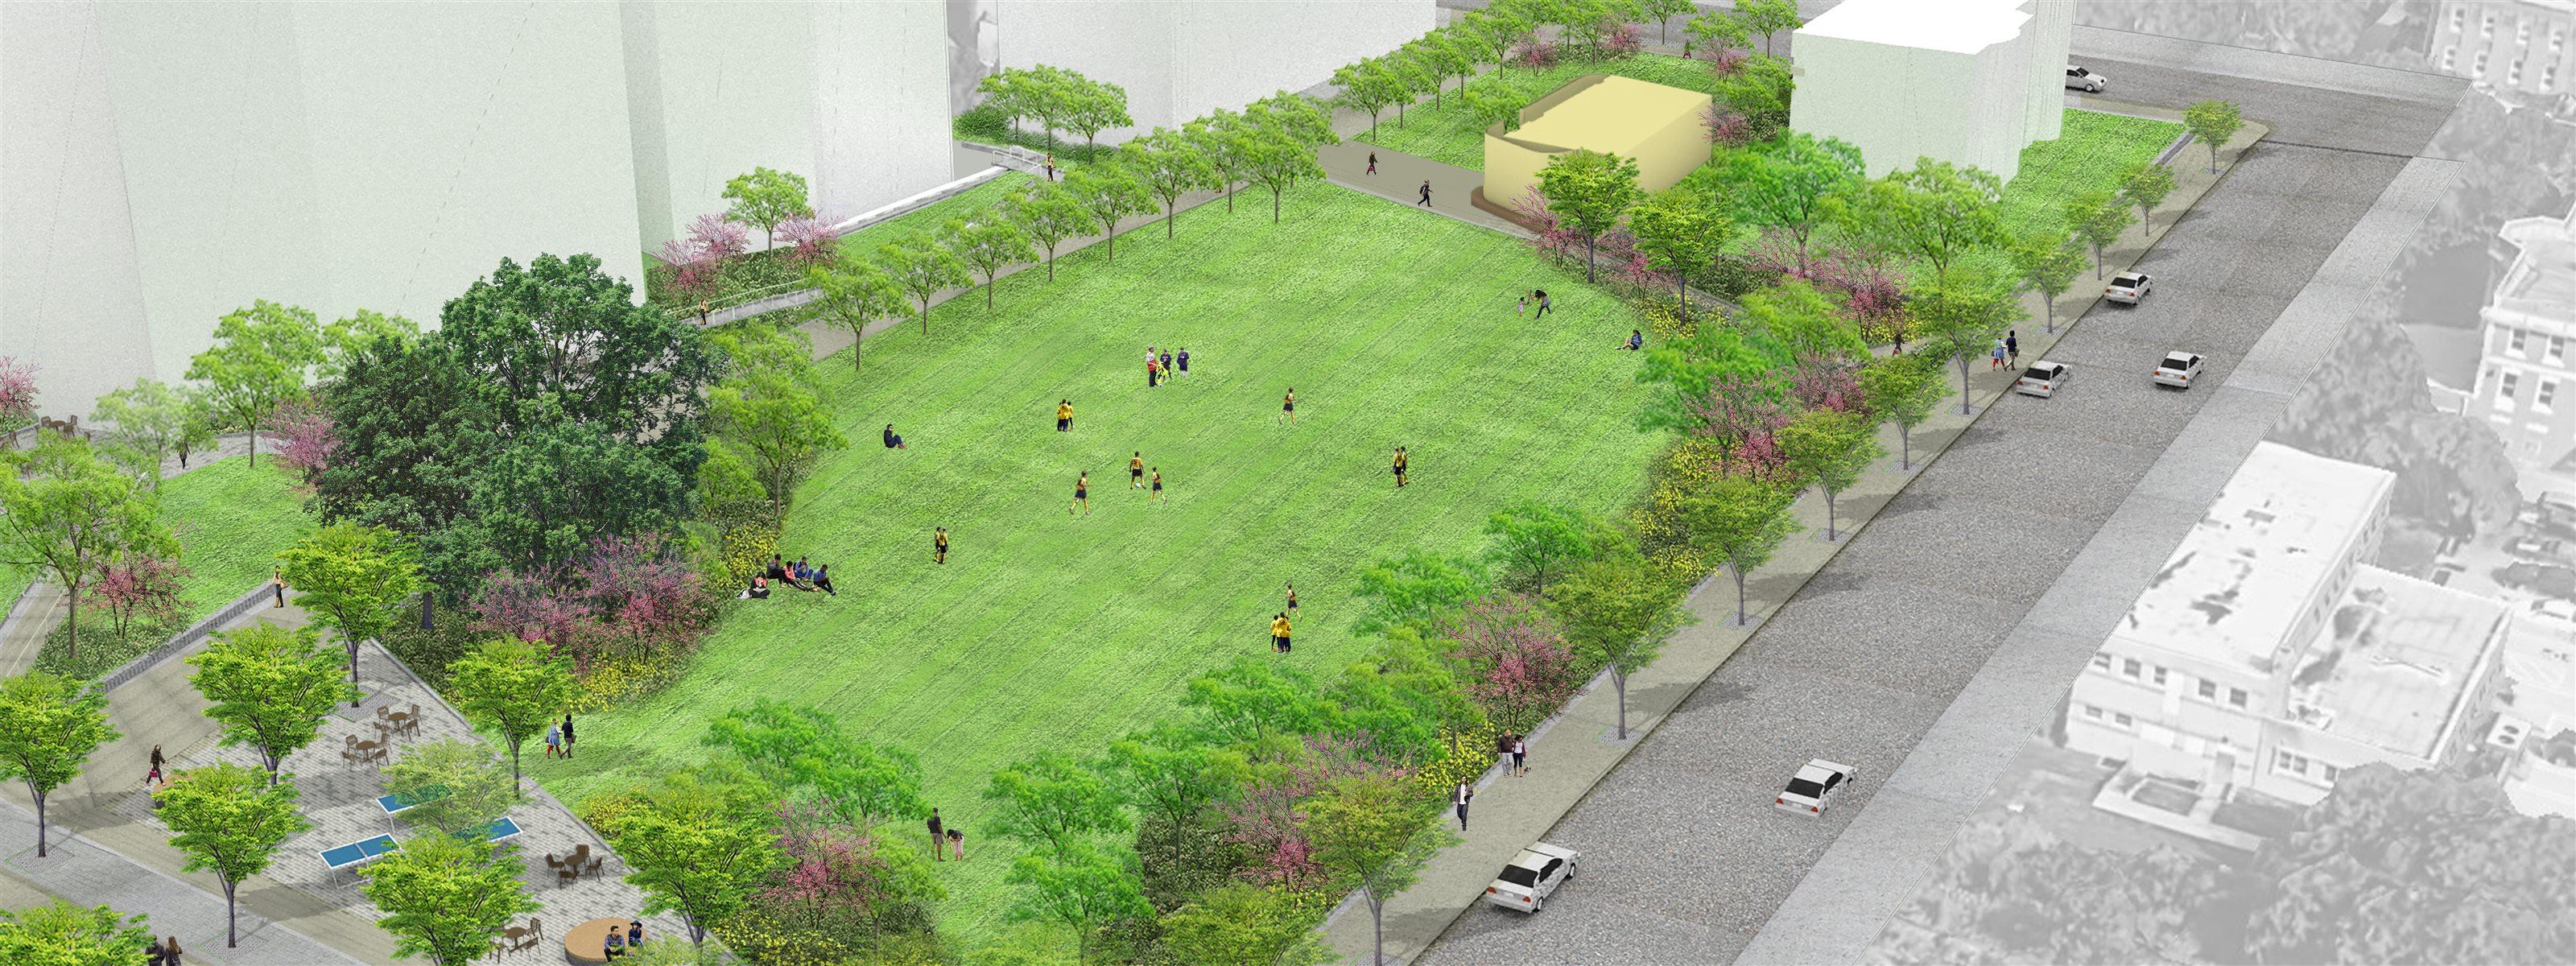 A conceptual rendering of the proposed green space. Image courtesy of Andropogon Associates.